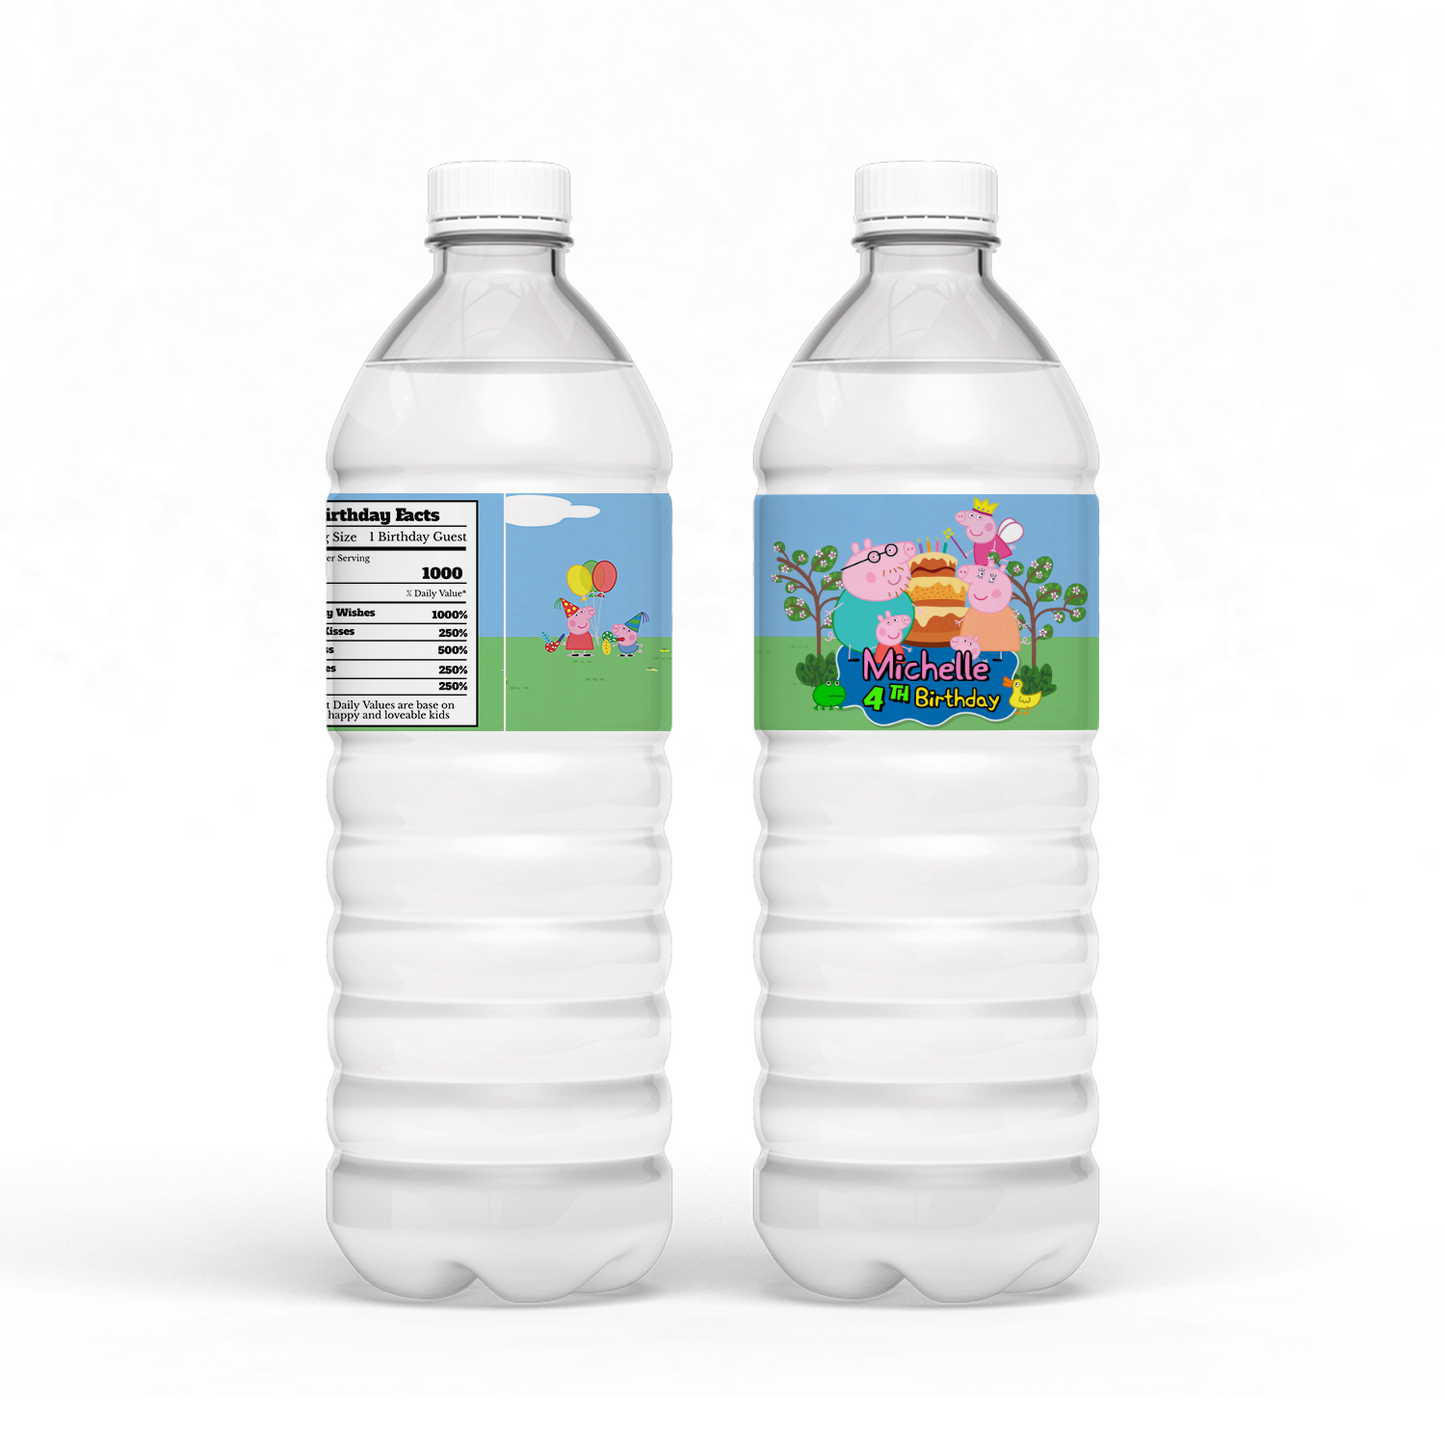 Water Bottle Label featuring Peppa Pig